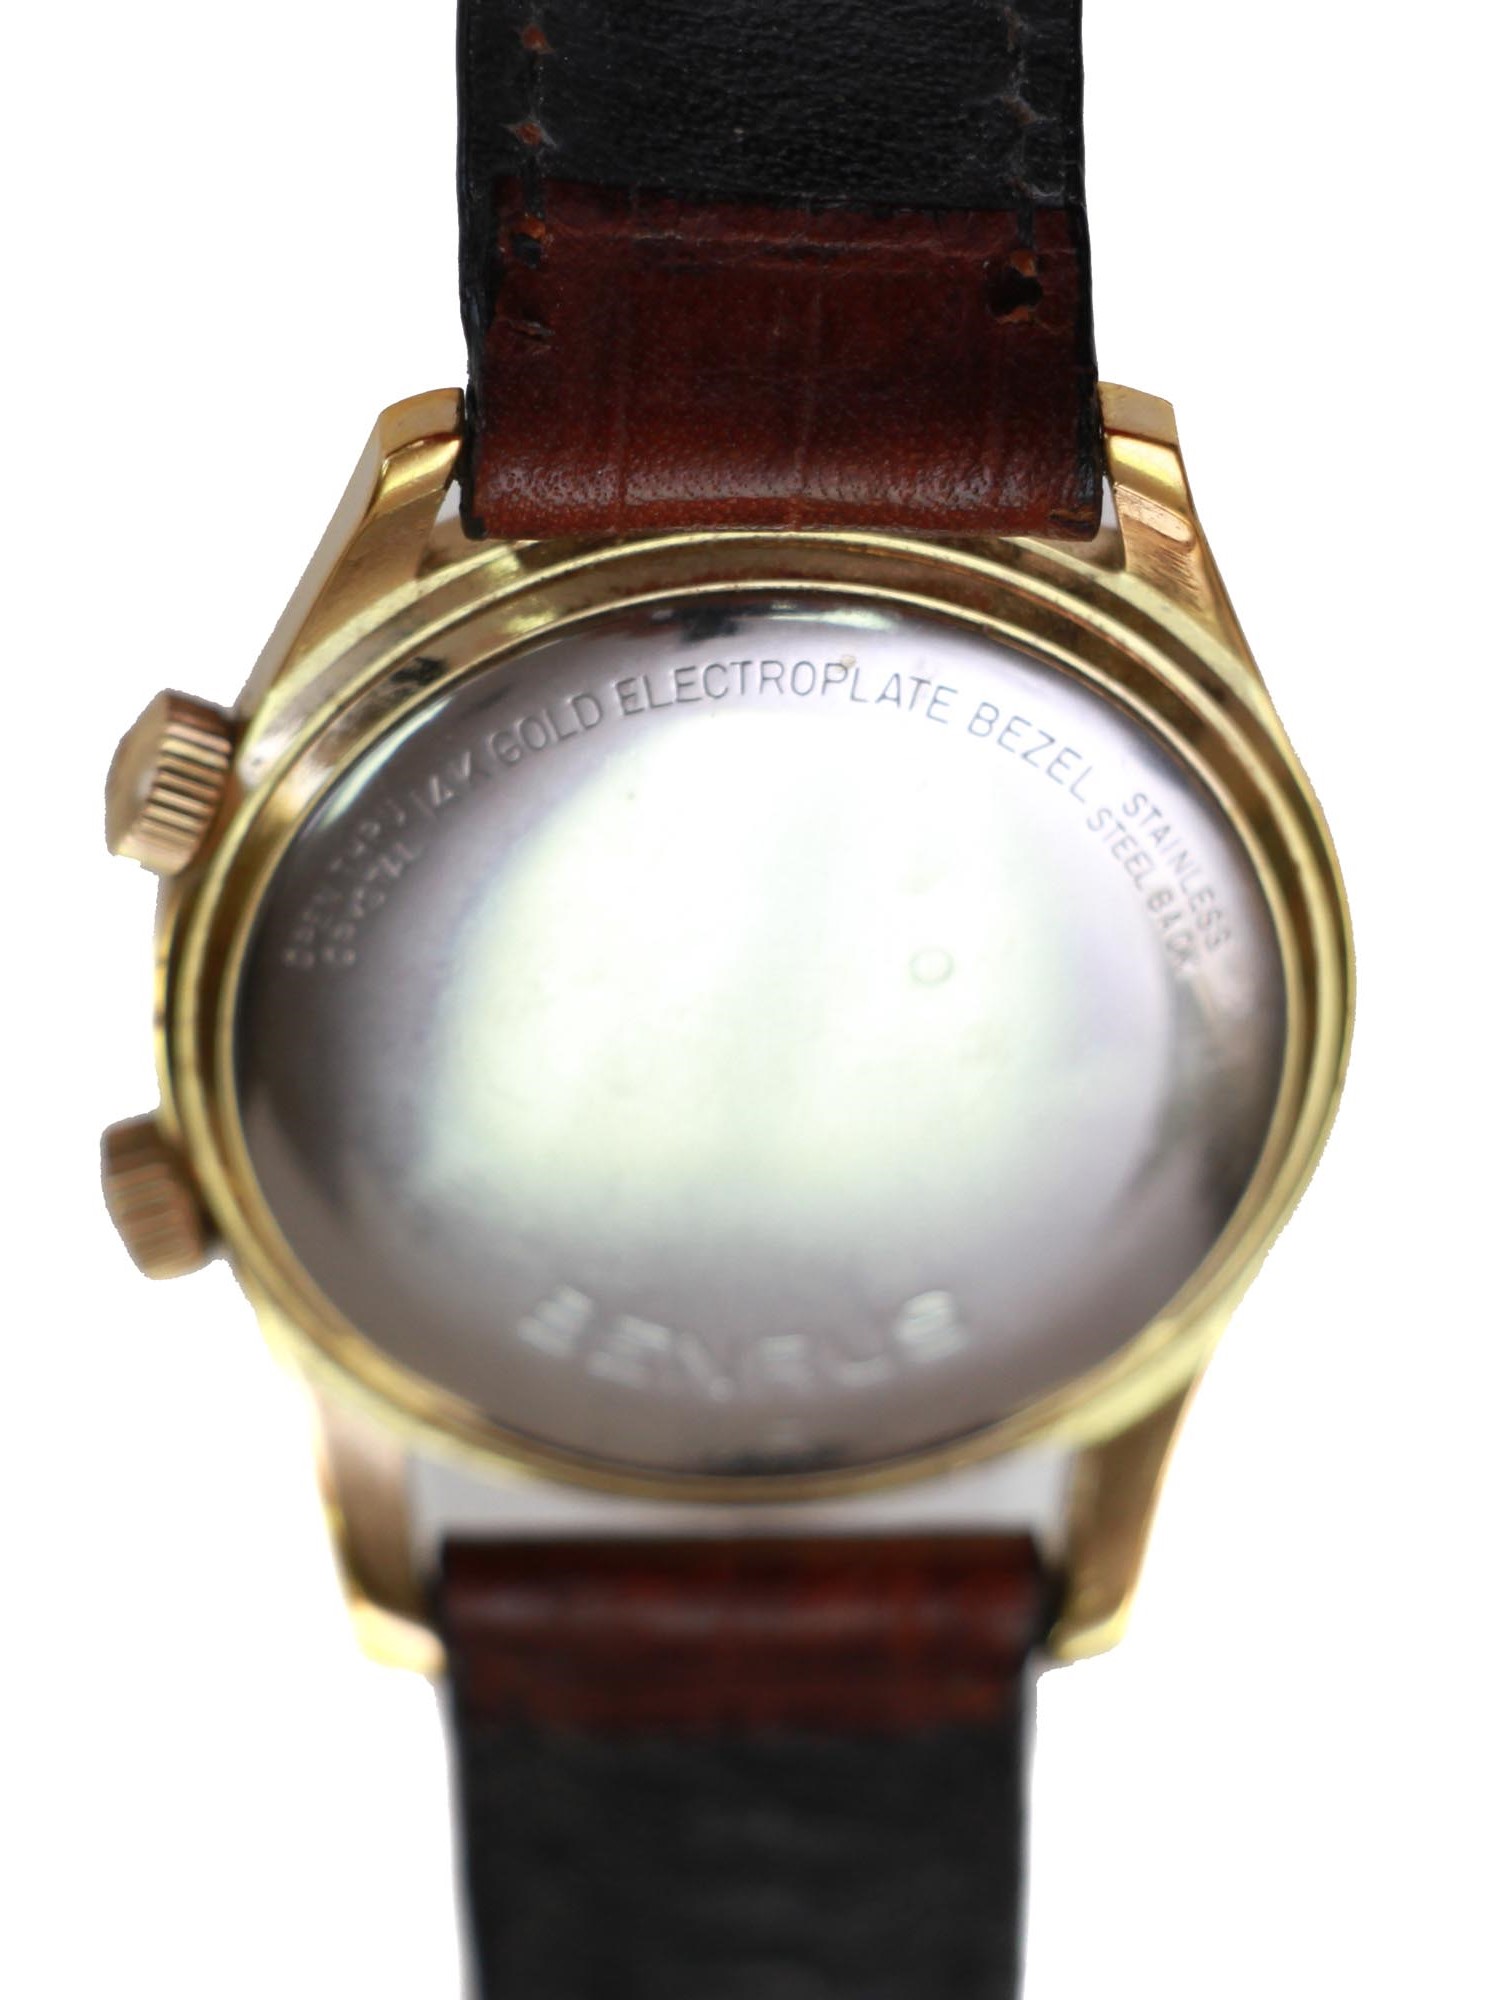 A VINTAGE BENRUS WR 14K GOLD ELECTROPLATE WATCH PIC-4